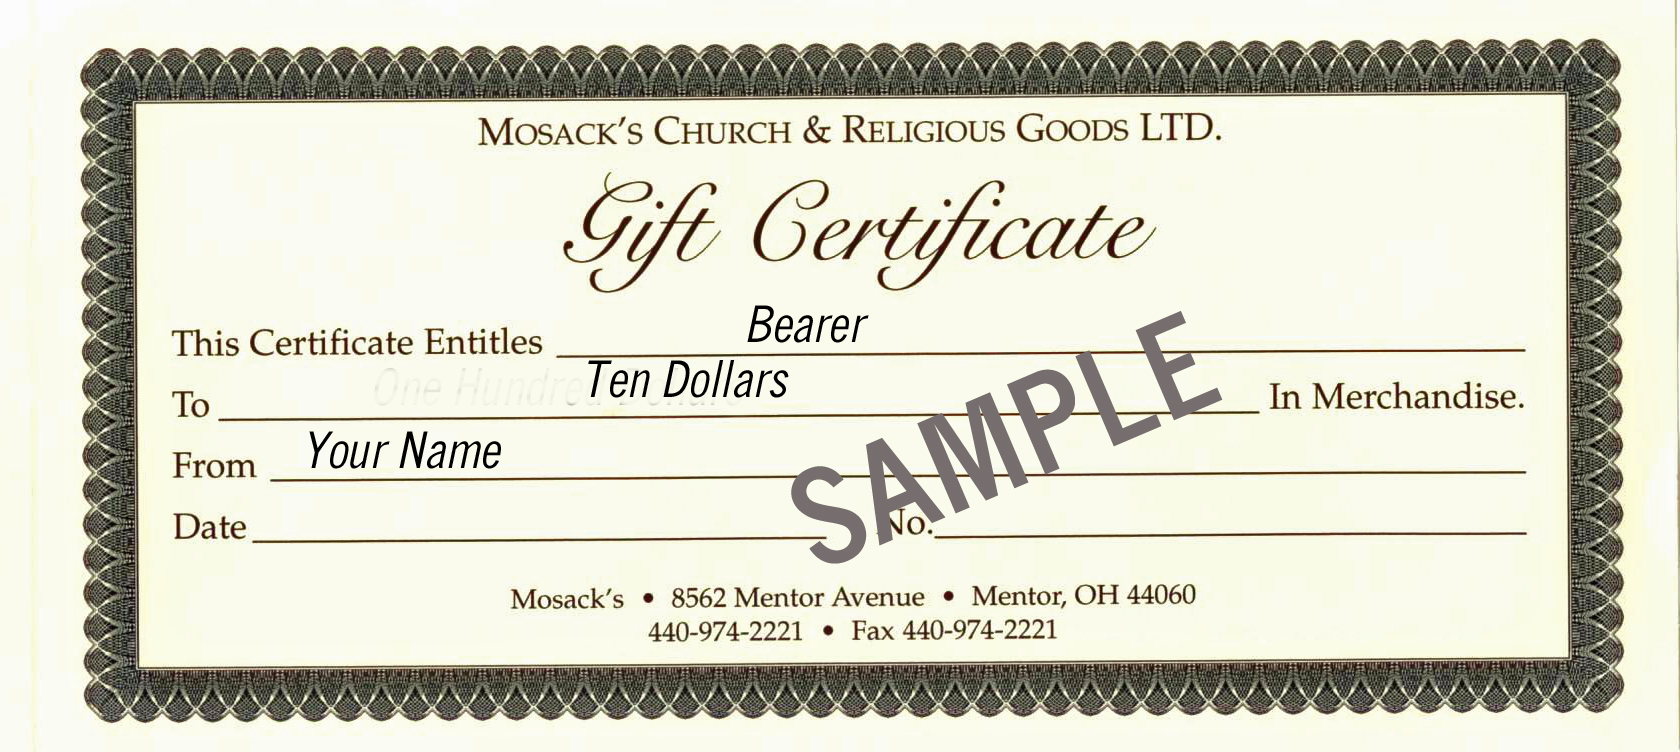 Gift Certificates at MOSACK'S